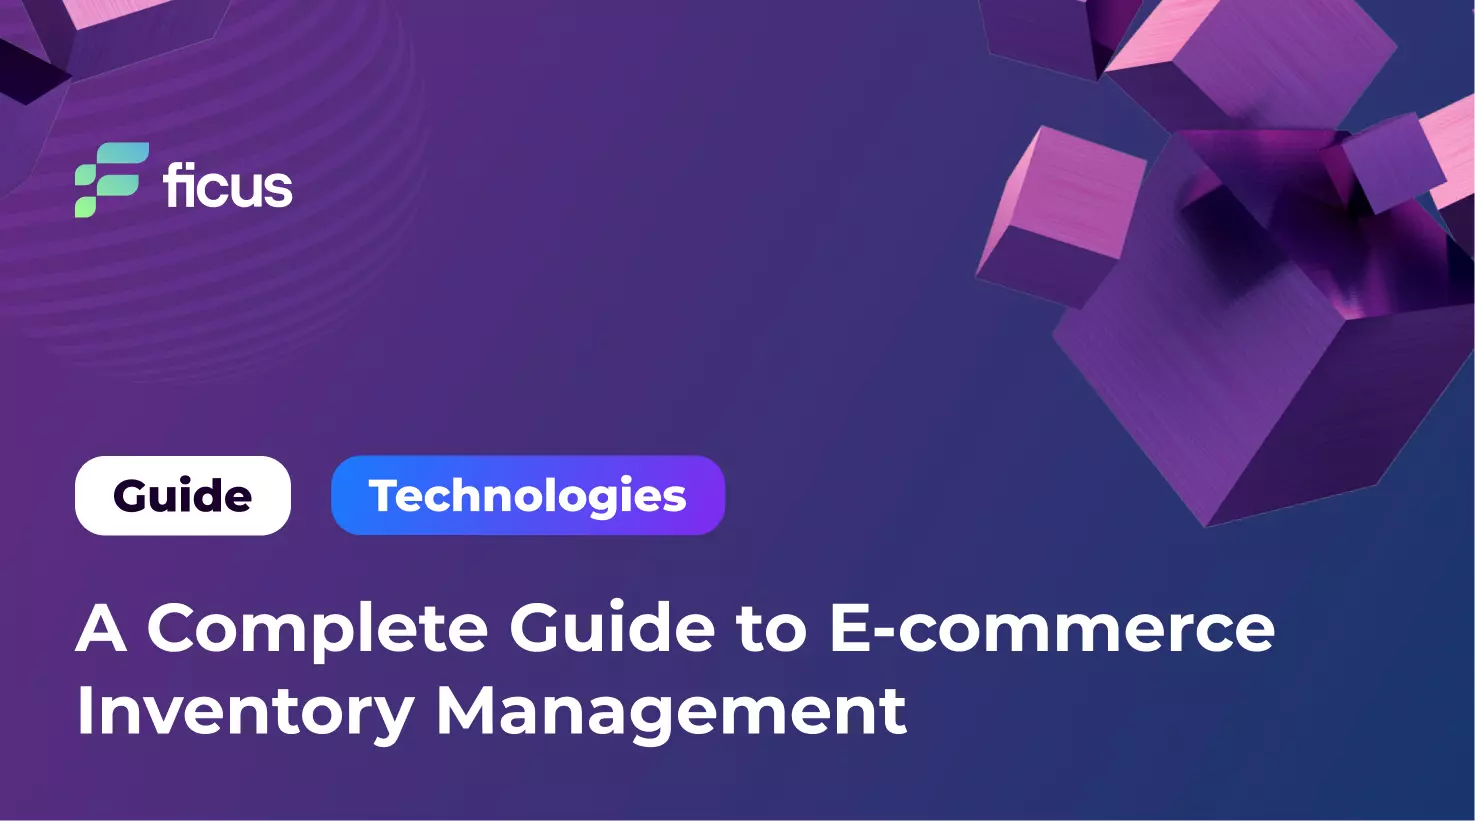 A Complete Guide to E-commerce Inventory Management